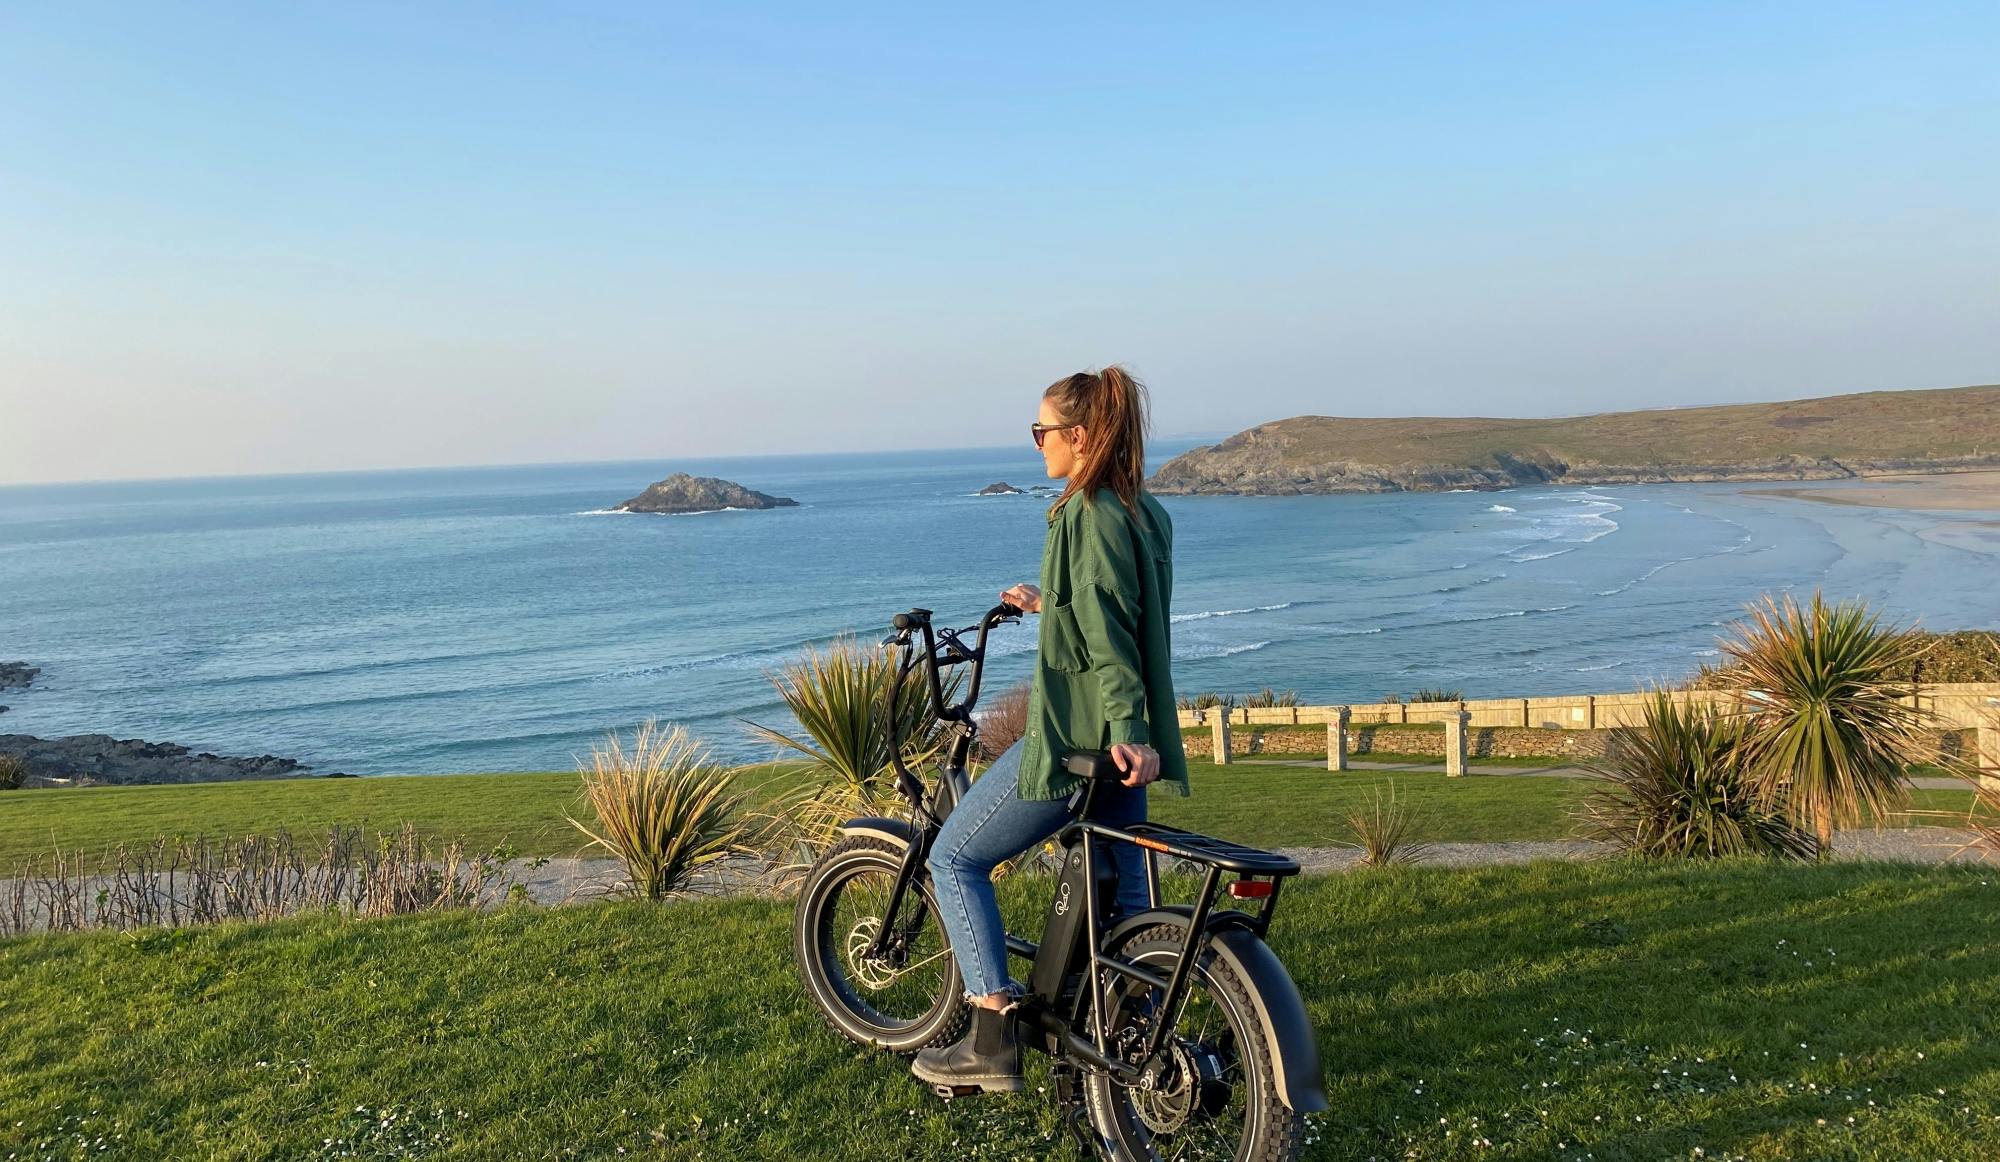 E-bike hire in Newquay for coast and town exploration